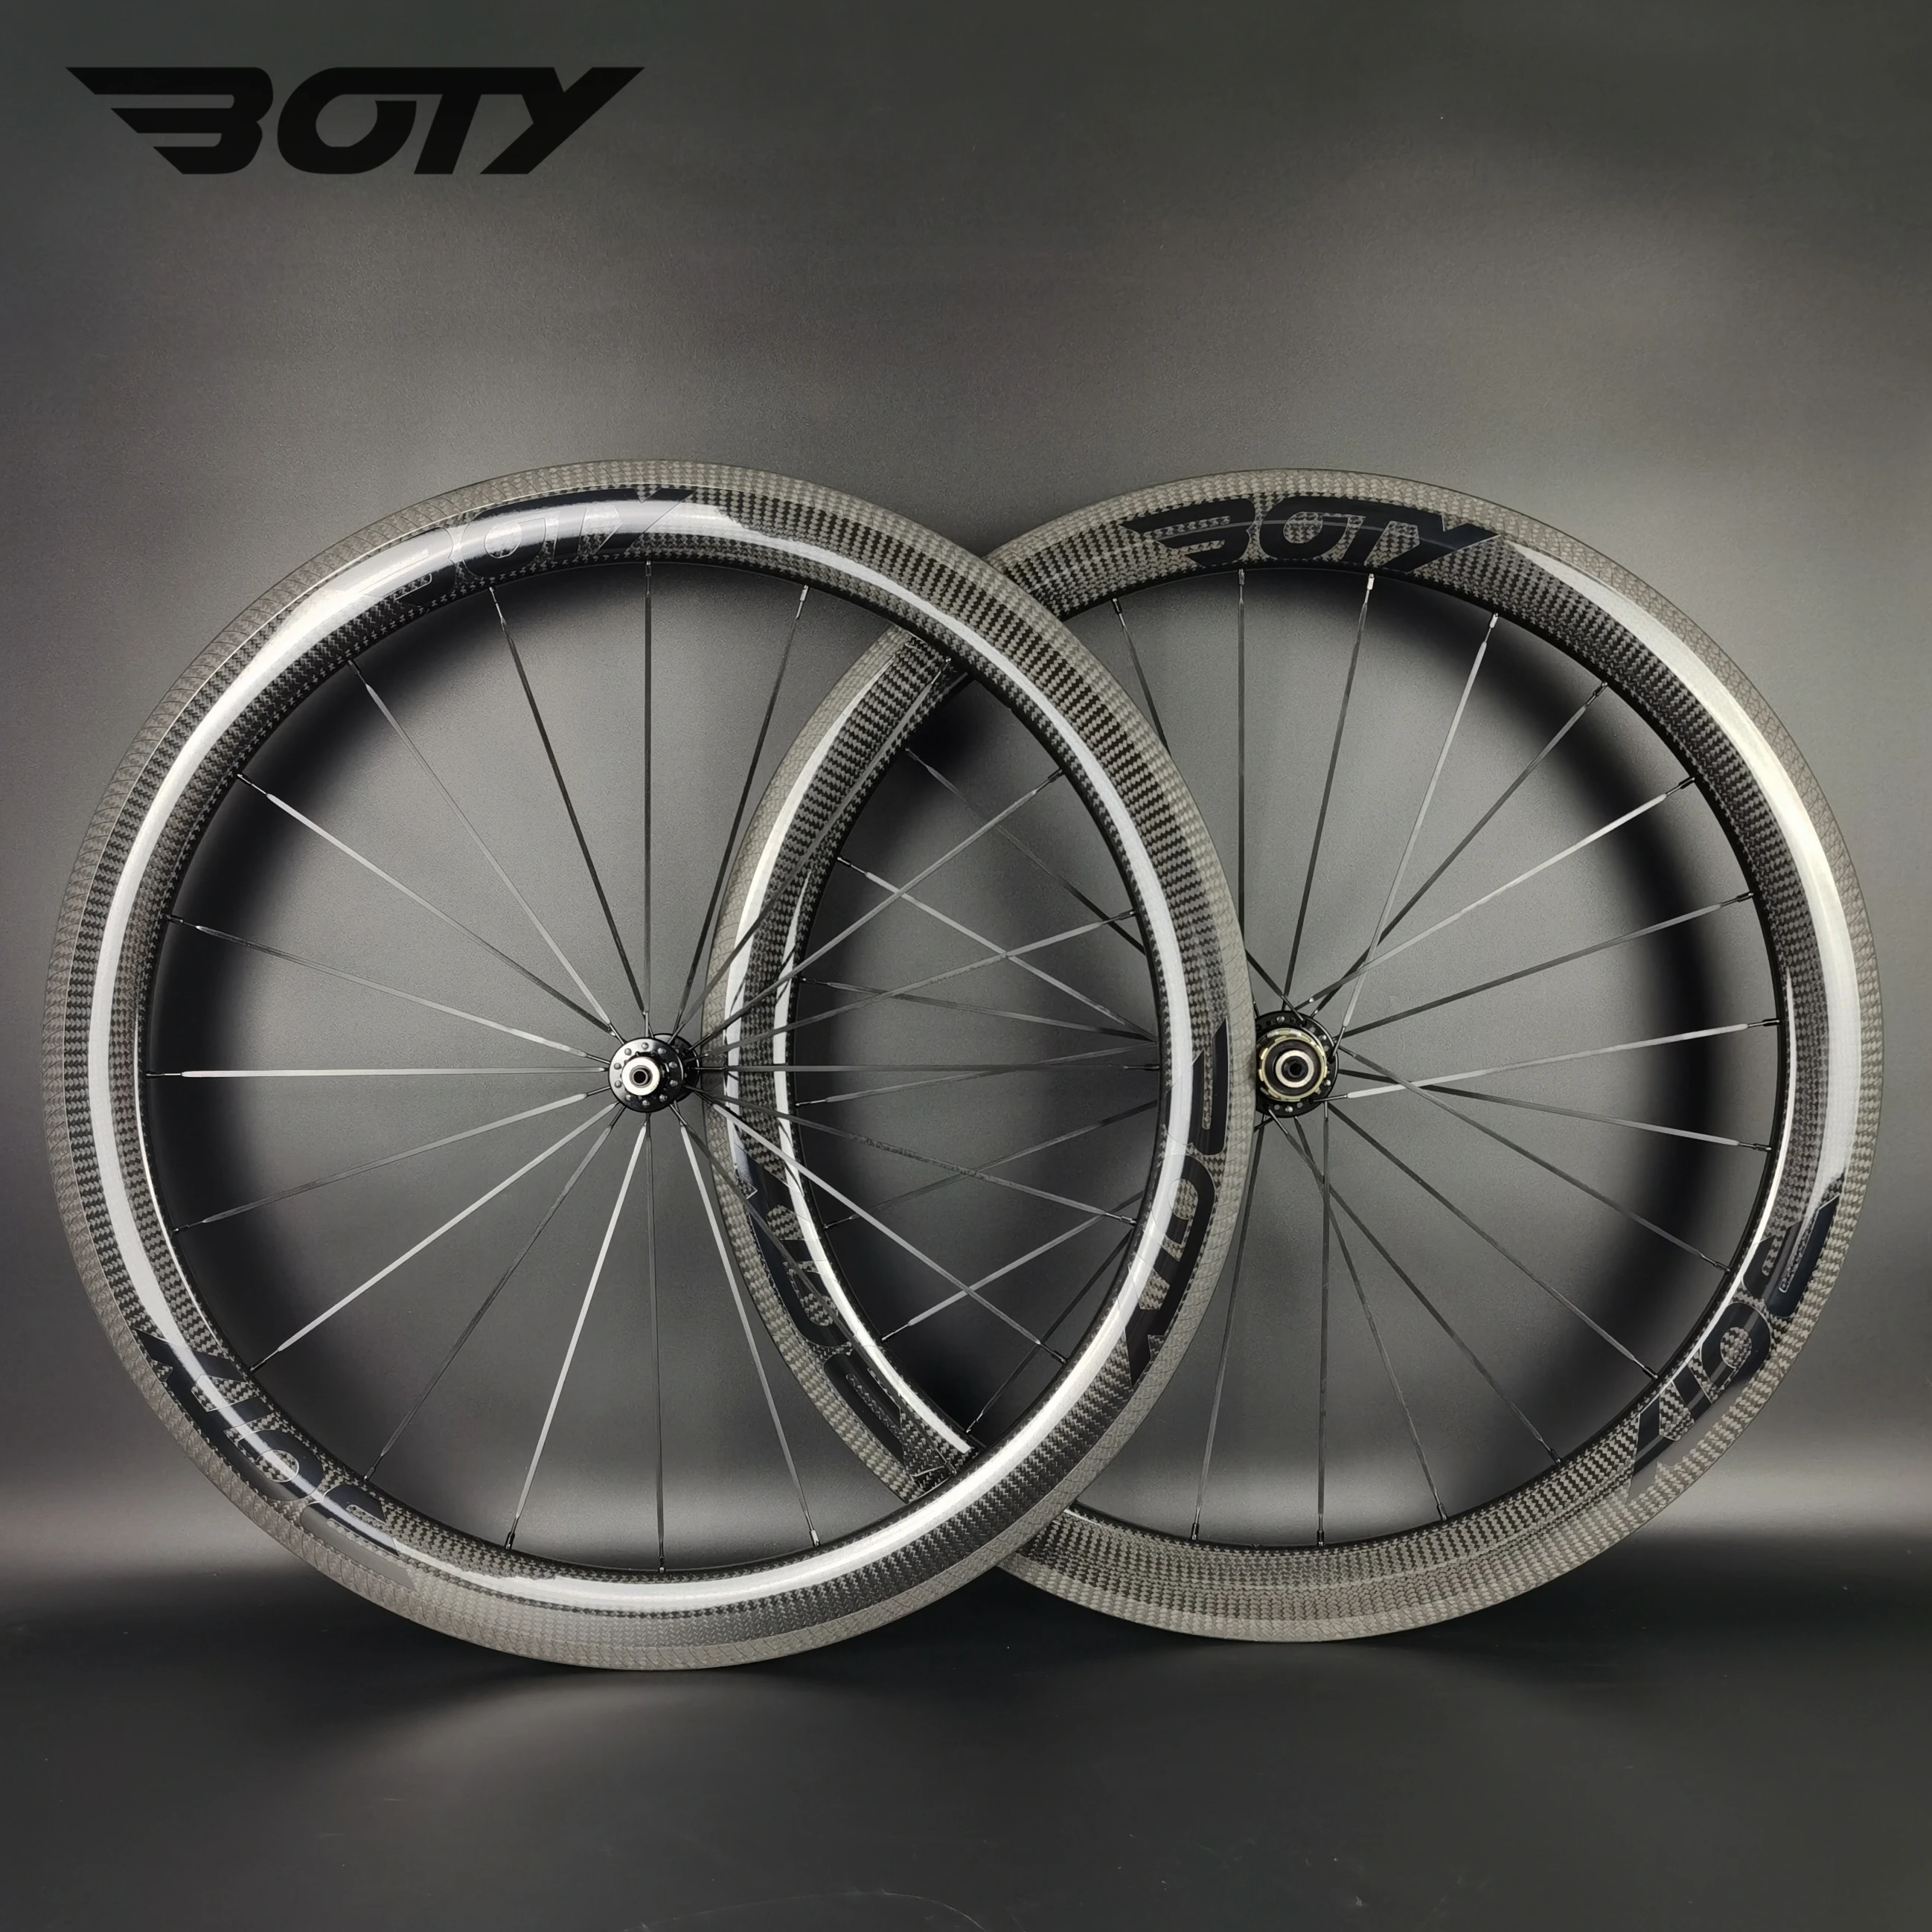 

BOTY 700C 50mm depth Road carbon wheels 23/25mm width bike Clincher/Tubeless/Tubular carbon wheelset with 3k twill glossy finish